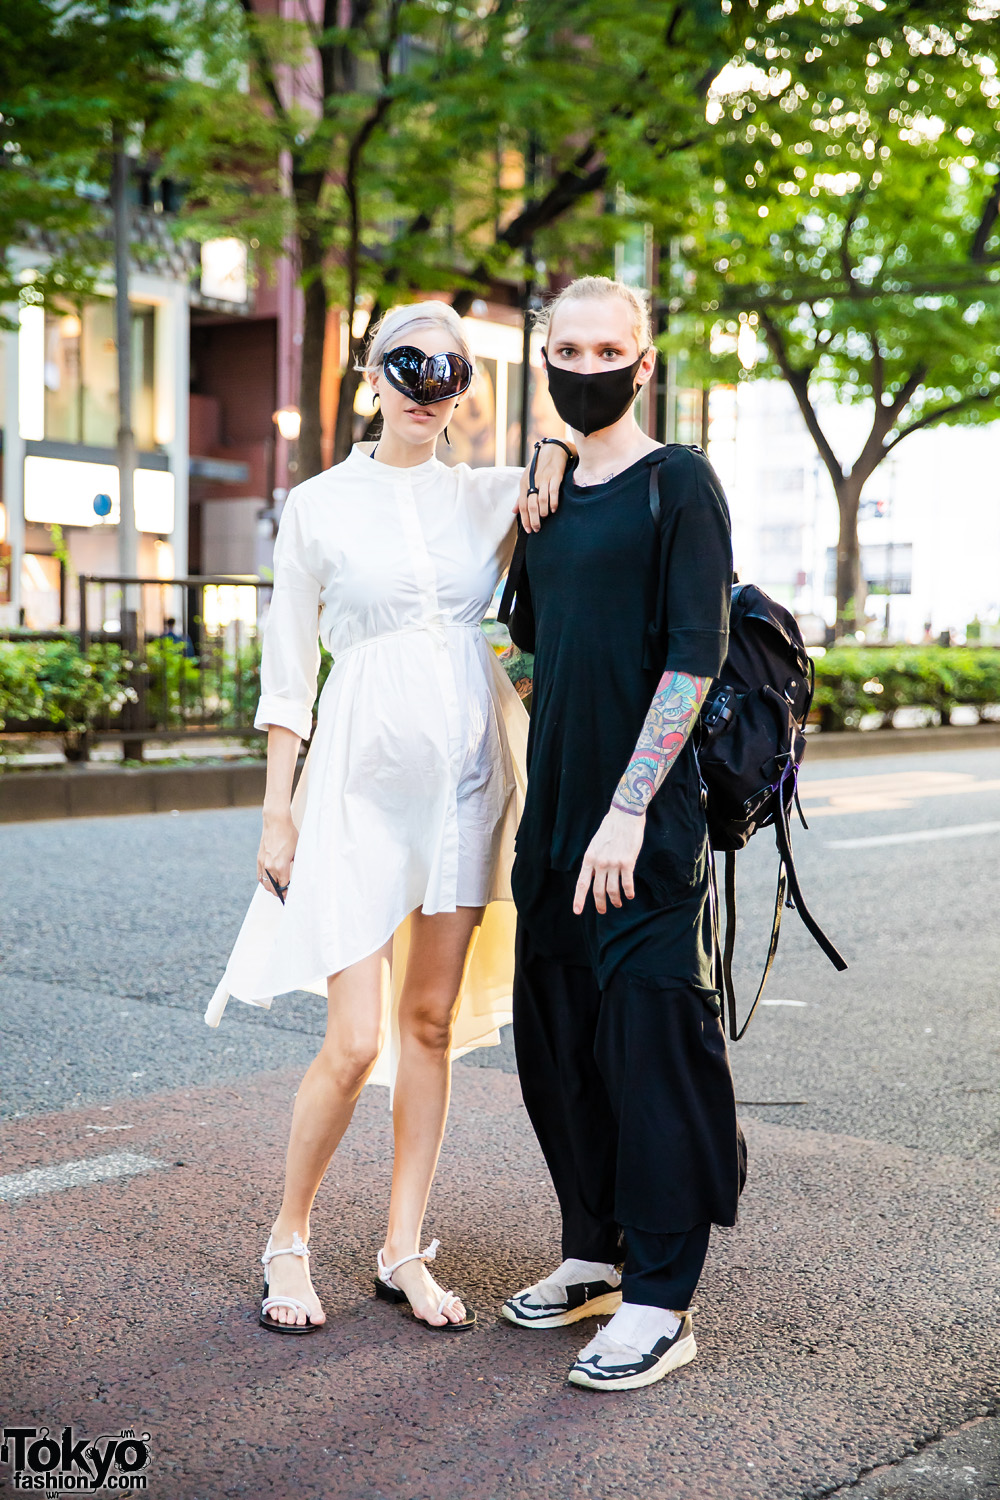 Duo in Black and White Look w/ Heart Glasses, Face Mask, Asymmetrical White Dress, Black Outfit & Backpack